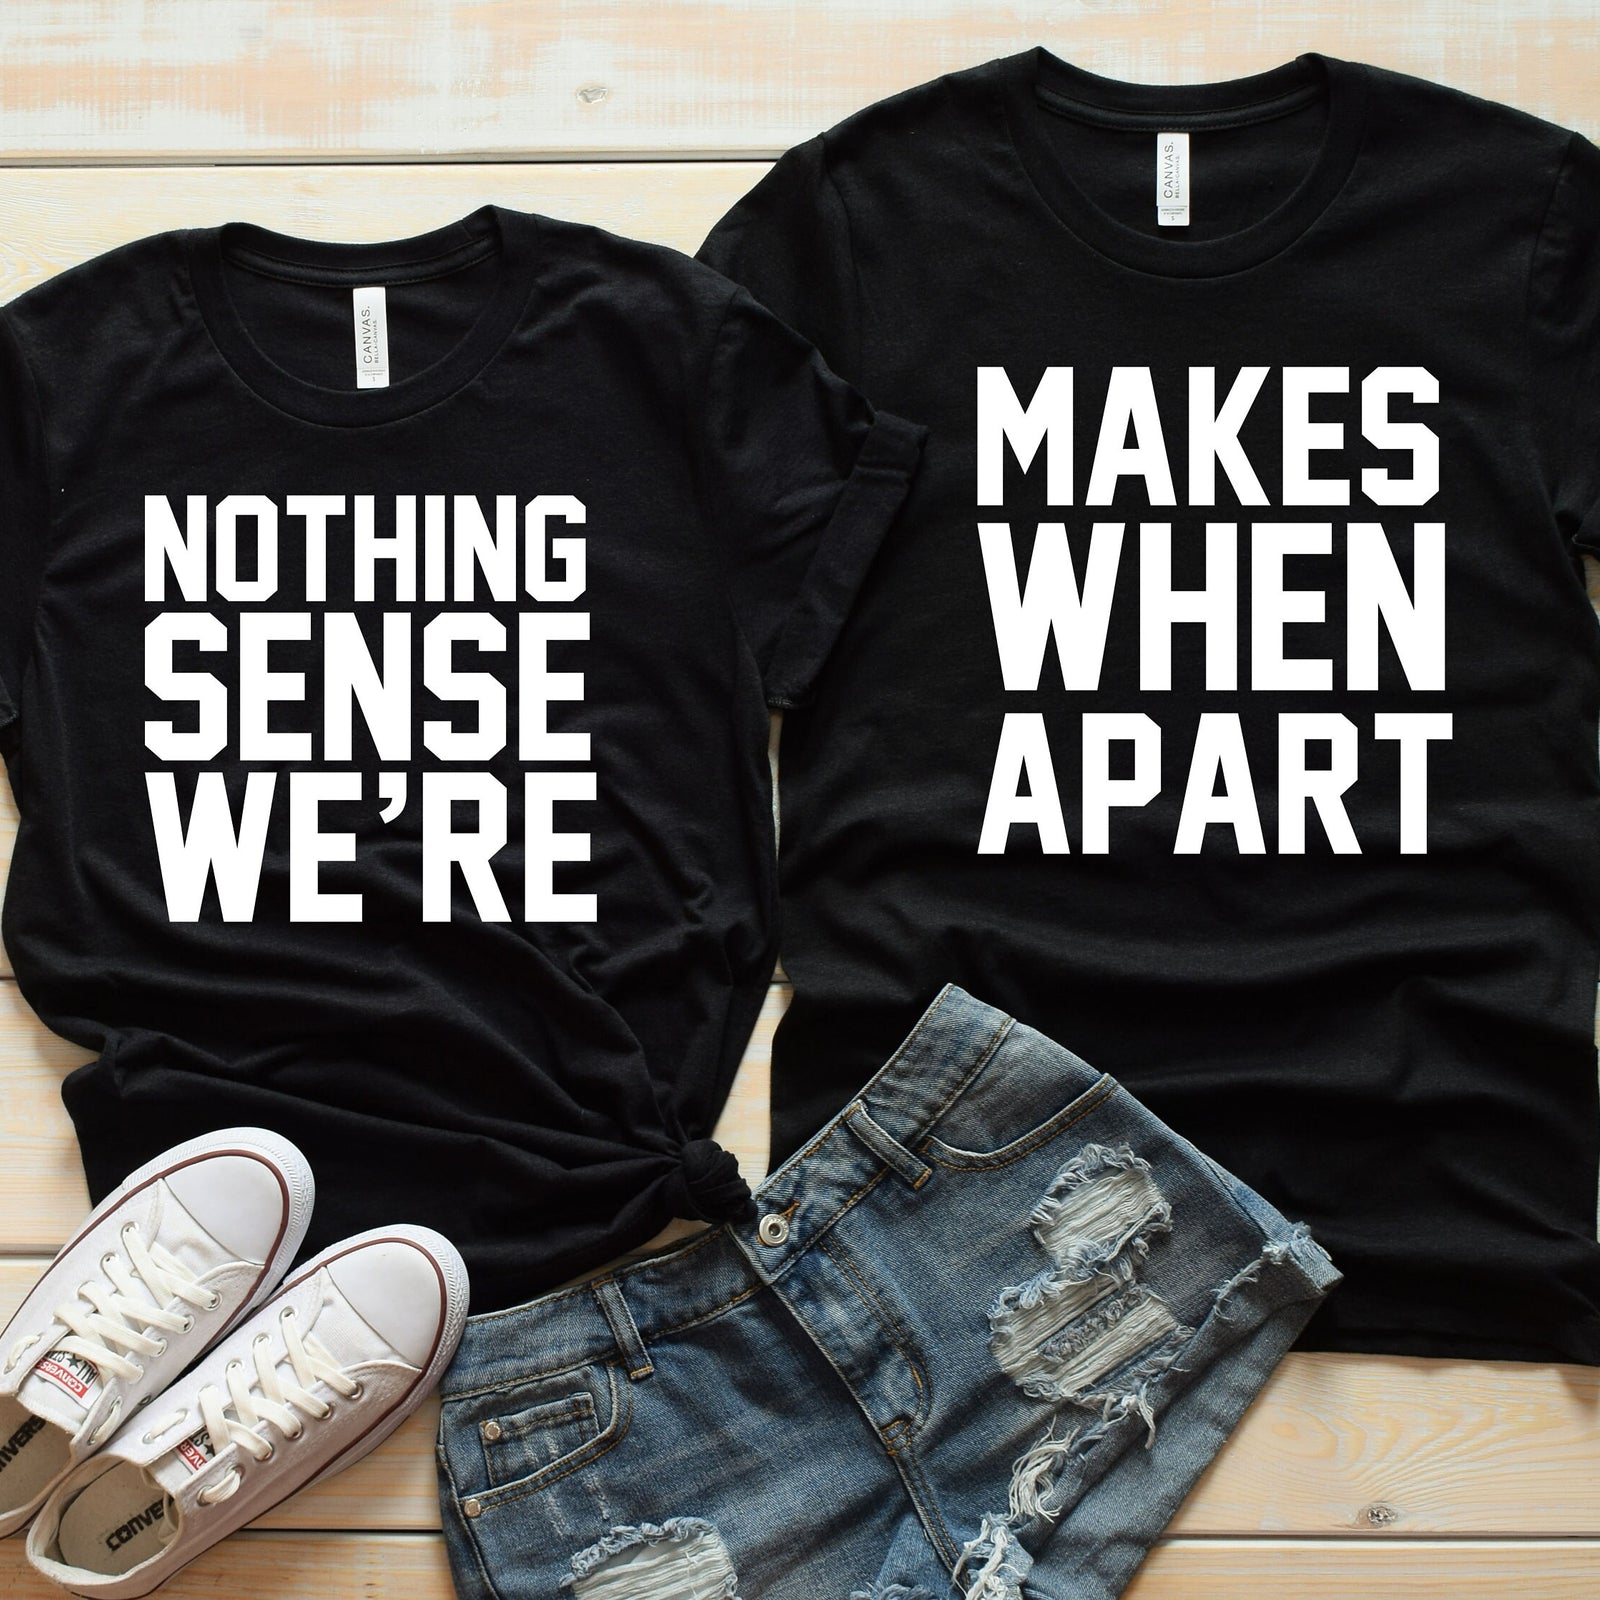 Nothing Makes Sense When We Are Apart -  Cute Couples T Shirts - Matching Shirts for Couples - Funny Matching Shirts